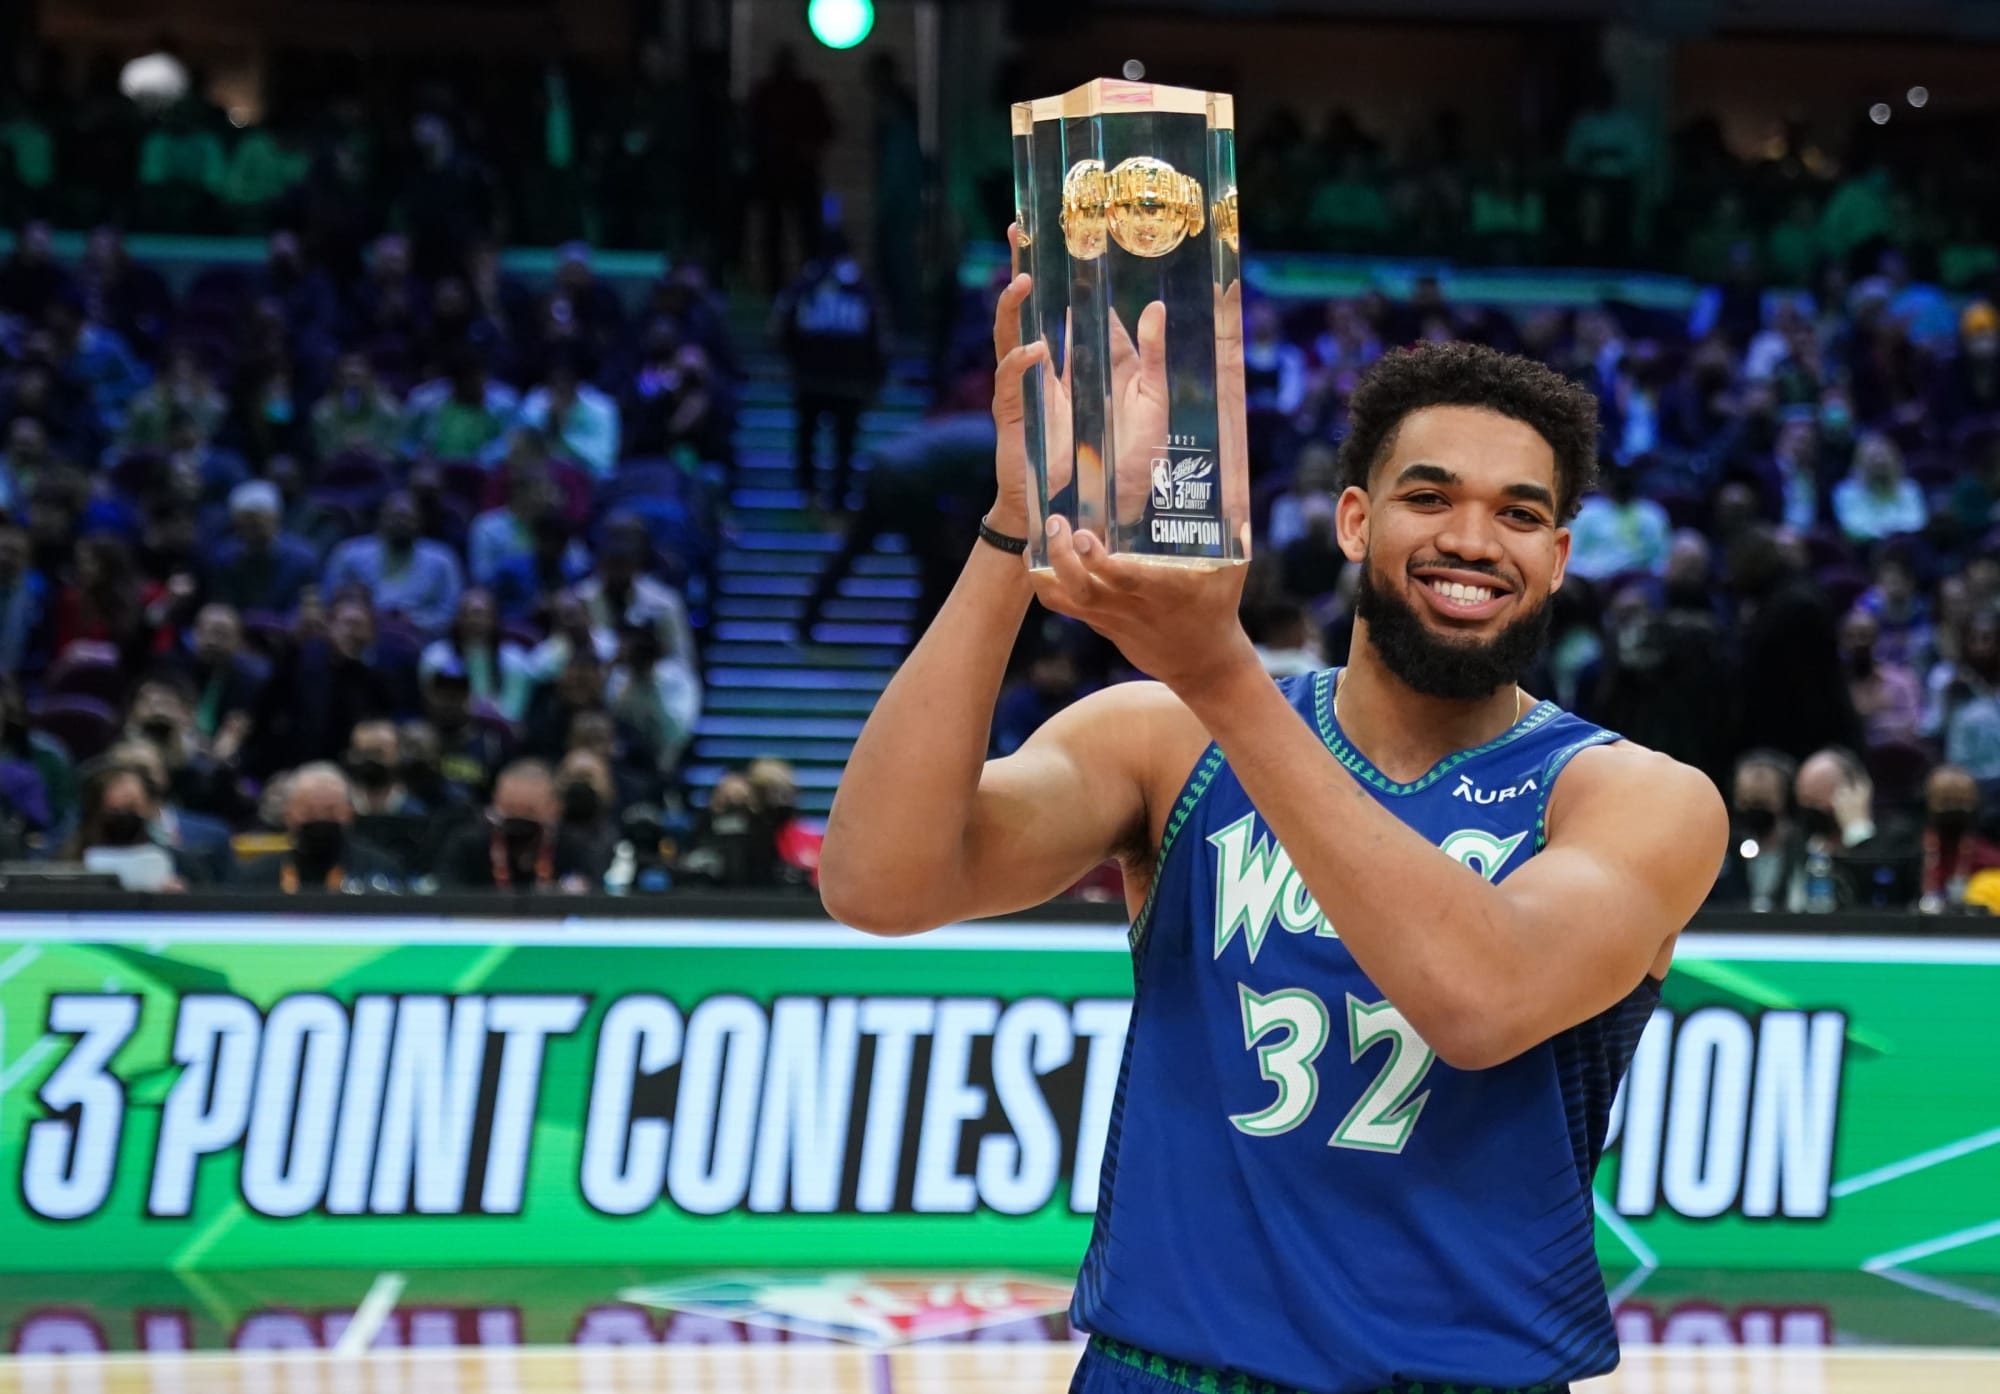 Timberwolves' KarlAnthony Towns wins 3Point Contest